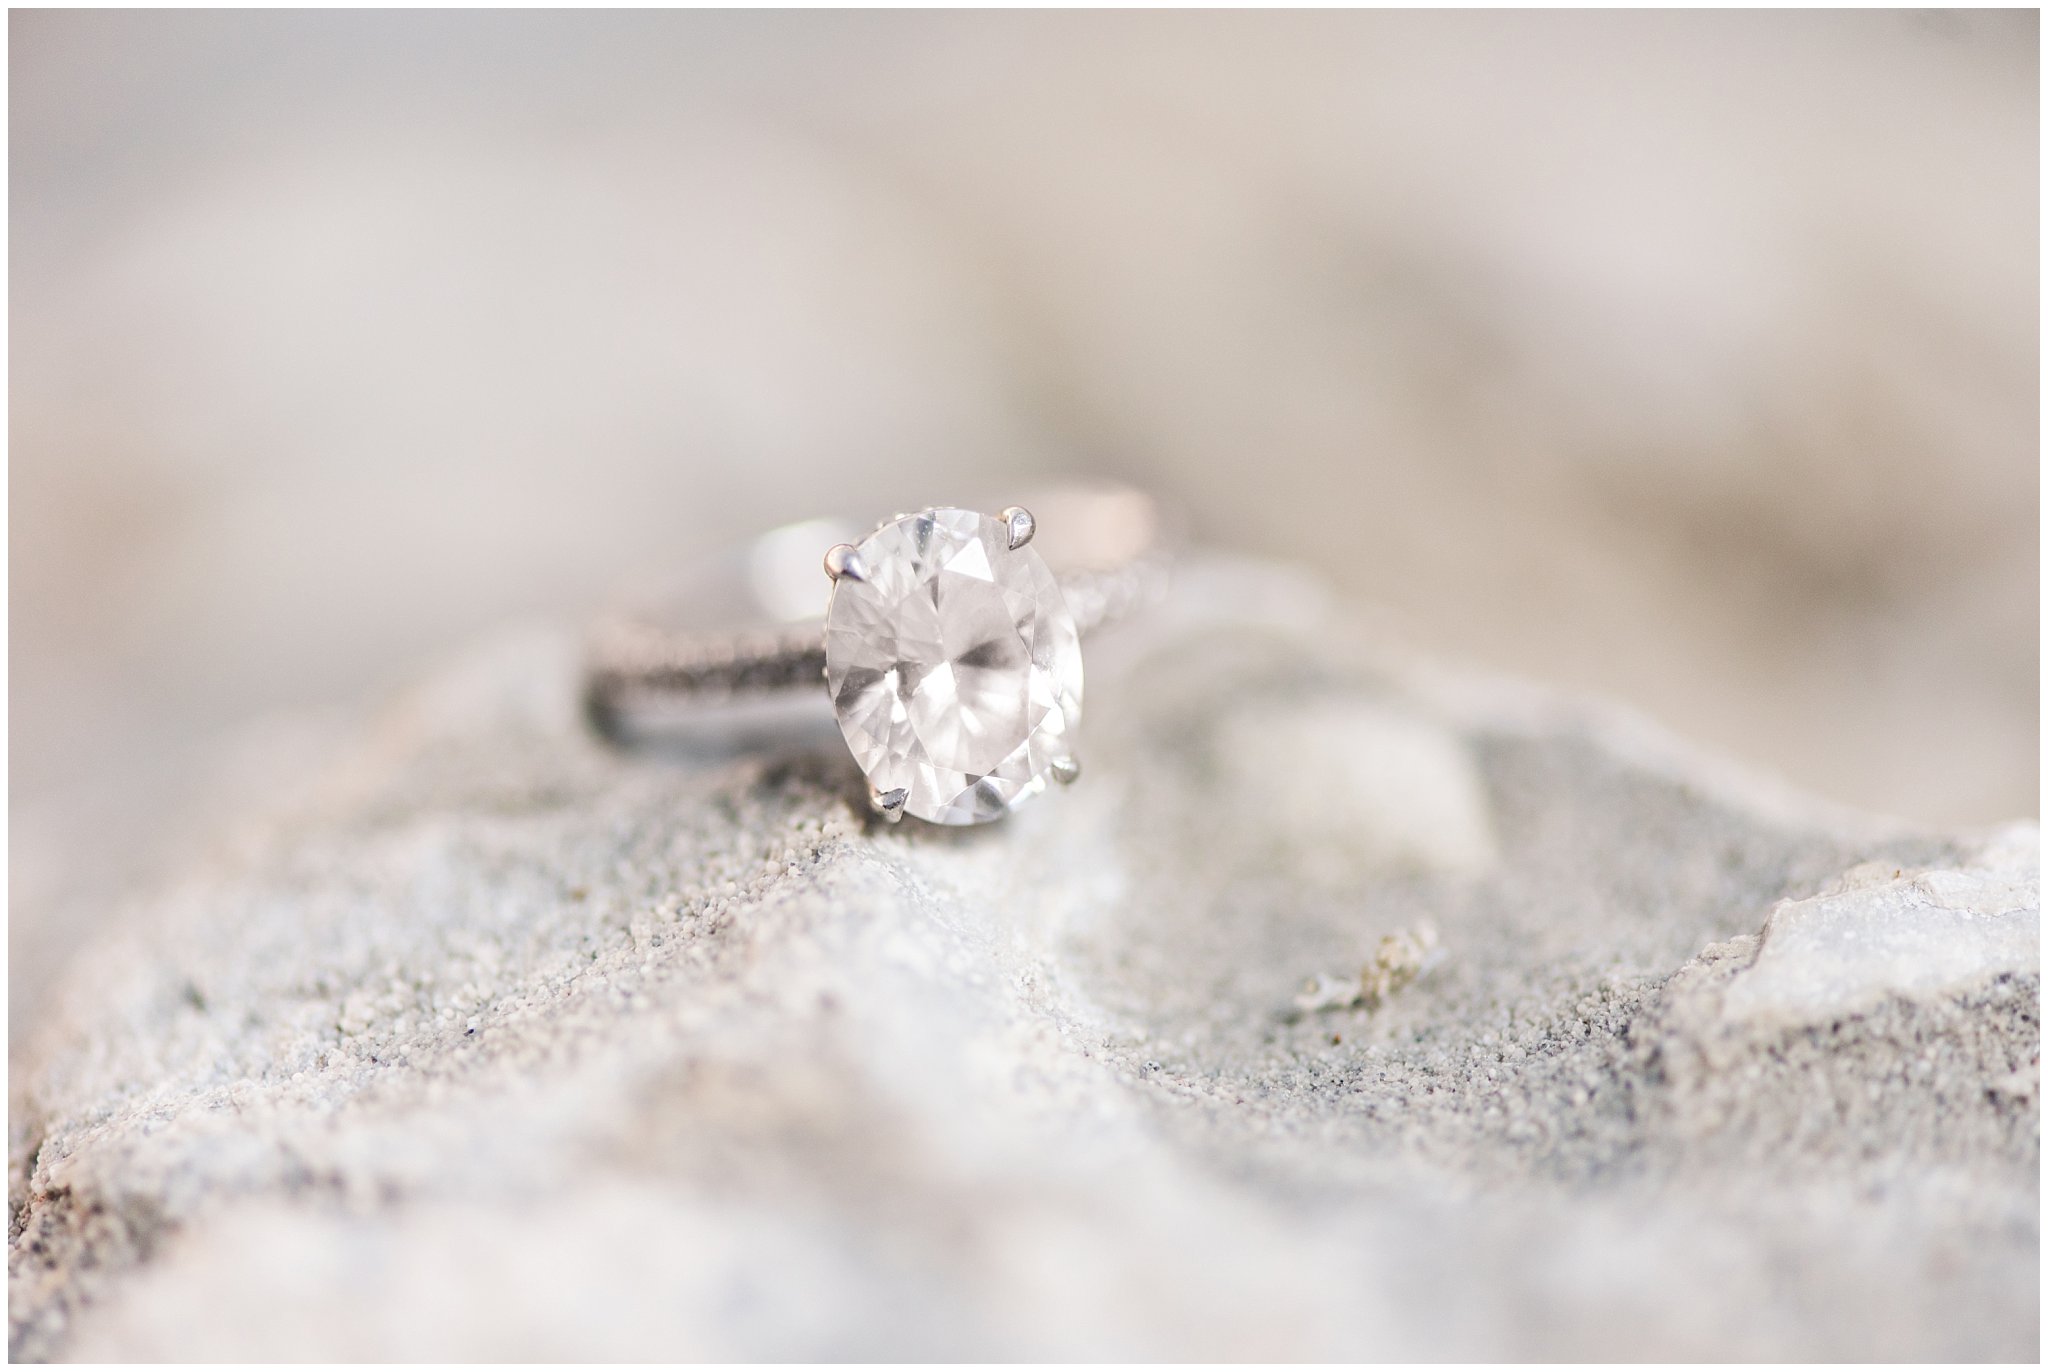 Engagement ring on the beach rocks | Top Utah Wedding and Couples Photos 2019 | Jessie and Dallin Photography